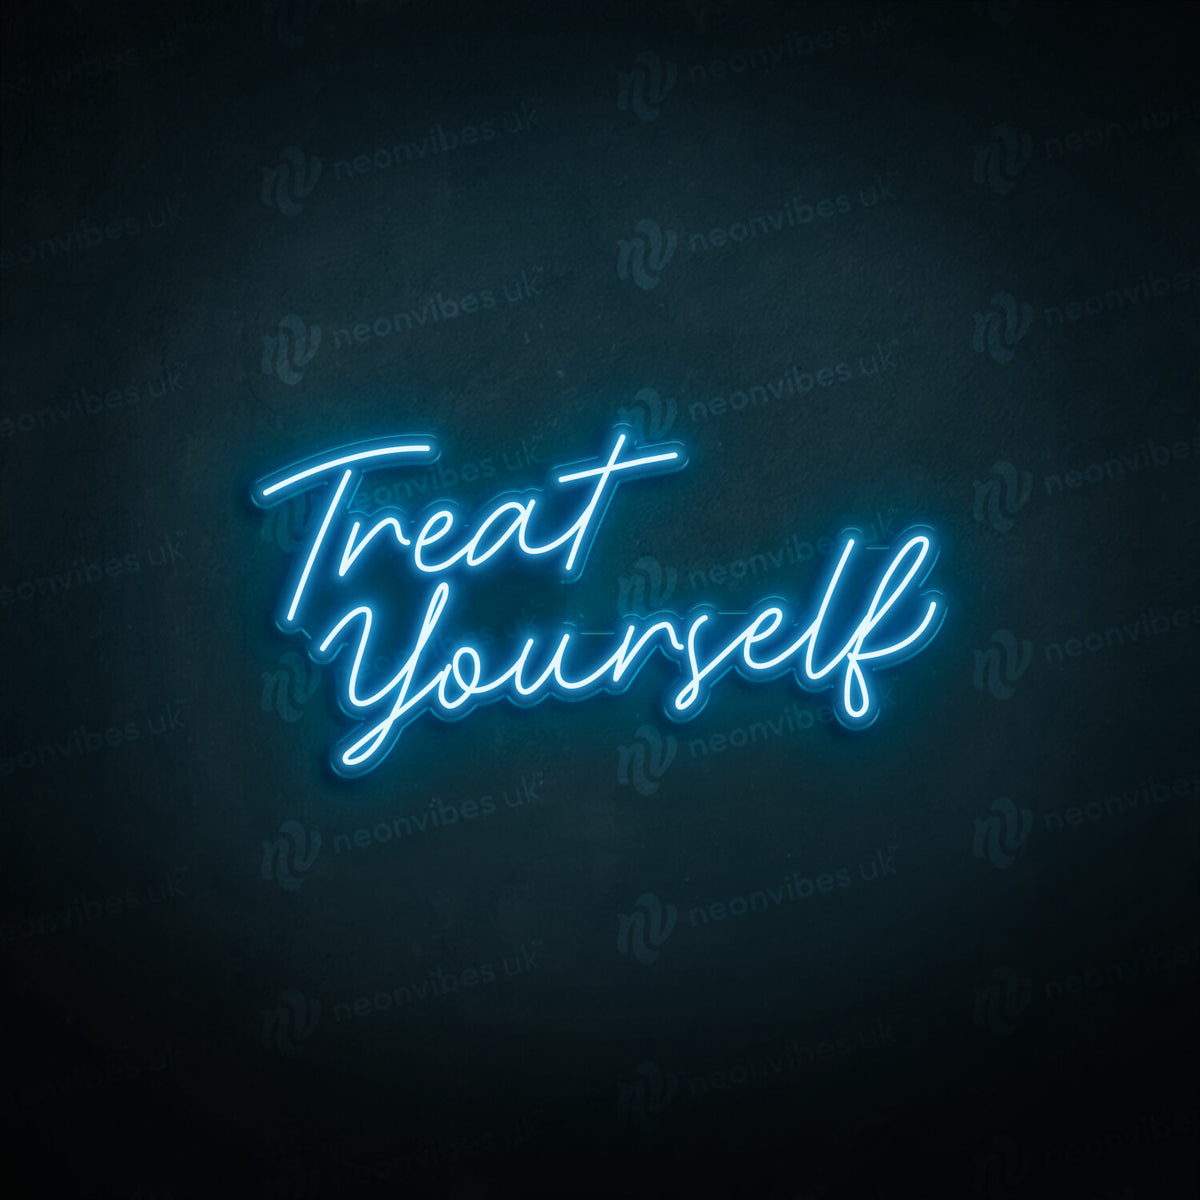 treat yourself neon sign